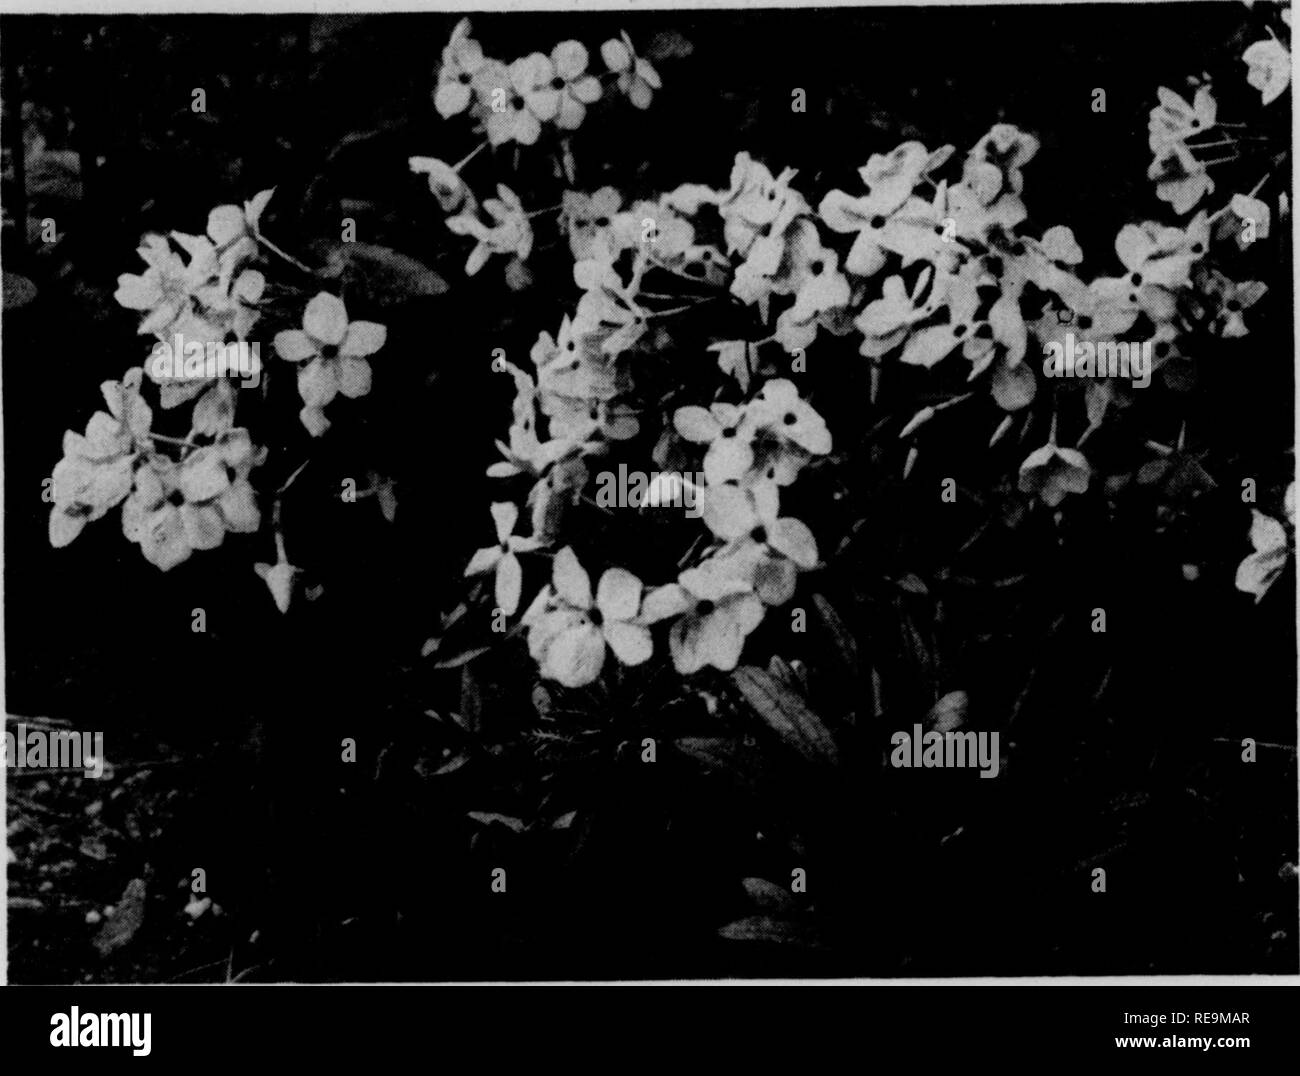 . Contributions from the Botanical Laboratory, vol. 12. Botany; Botany. 218 THE NATIONAL HORTICULTURAL MAGAZINE July, 1935. ; July, 1935 THE NATIONAL HORTICULTURAL MAGAZINE 219 Phlox stolonijera will be taken up next. If the name amoetia is used for this at all, it should be followed by the word Hort.; but the prior name P. prociimbens Lehmann should really be adopted for it instead. The true native Phlox amoena of Sims is a southeastern species, its dis- persal-center lying in the Appala- chians along the boundary between Alabama and Georgia. From there it has spread to Putnam County, Florida Stock Photo